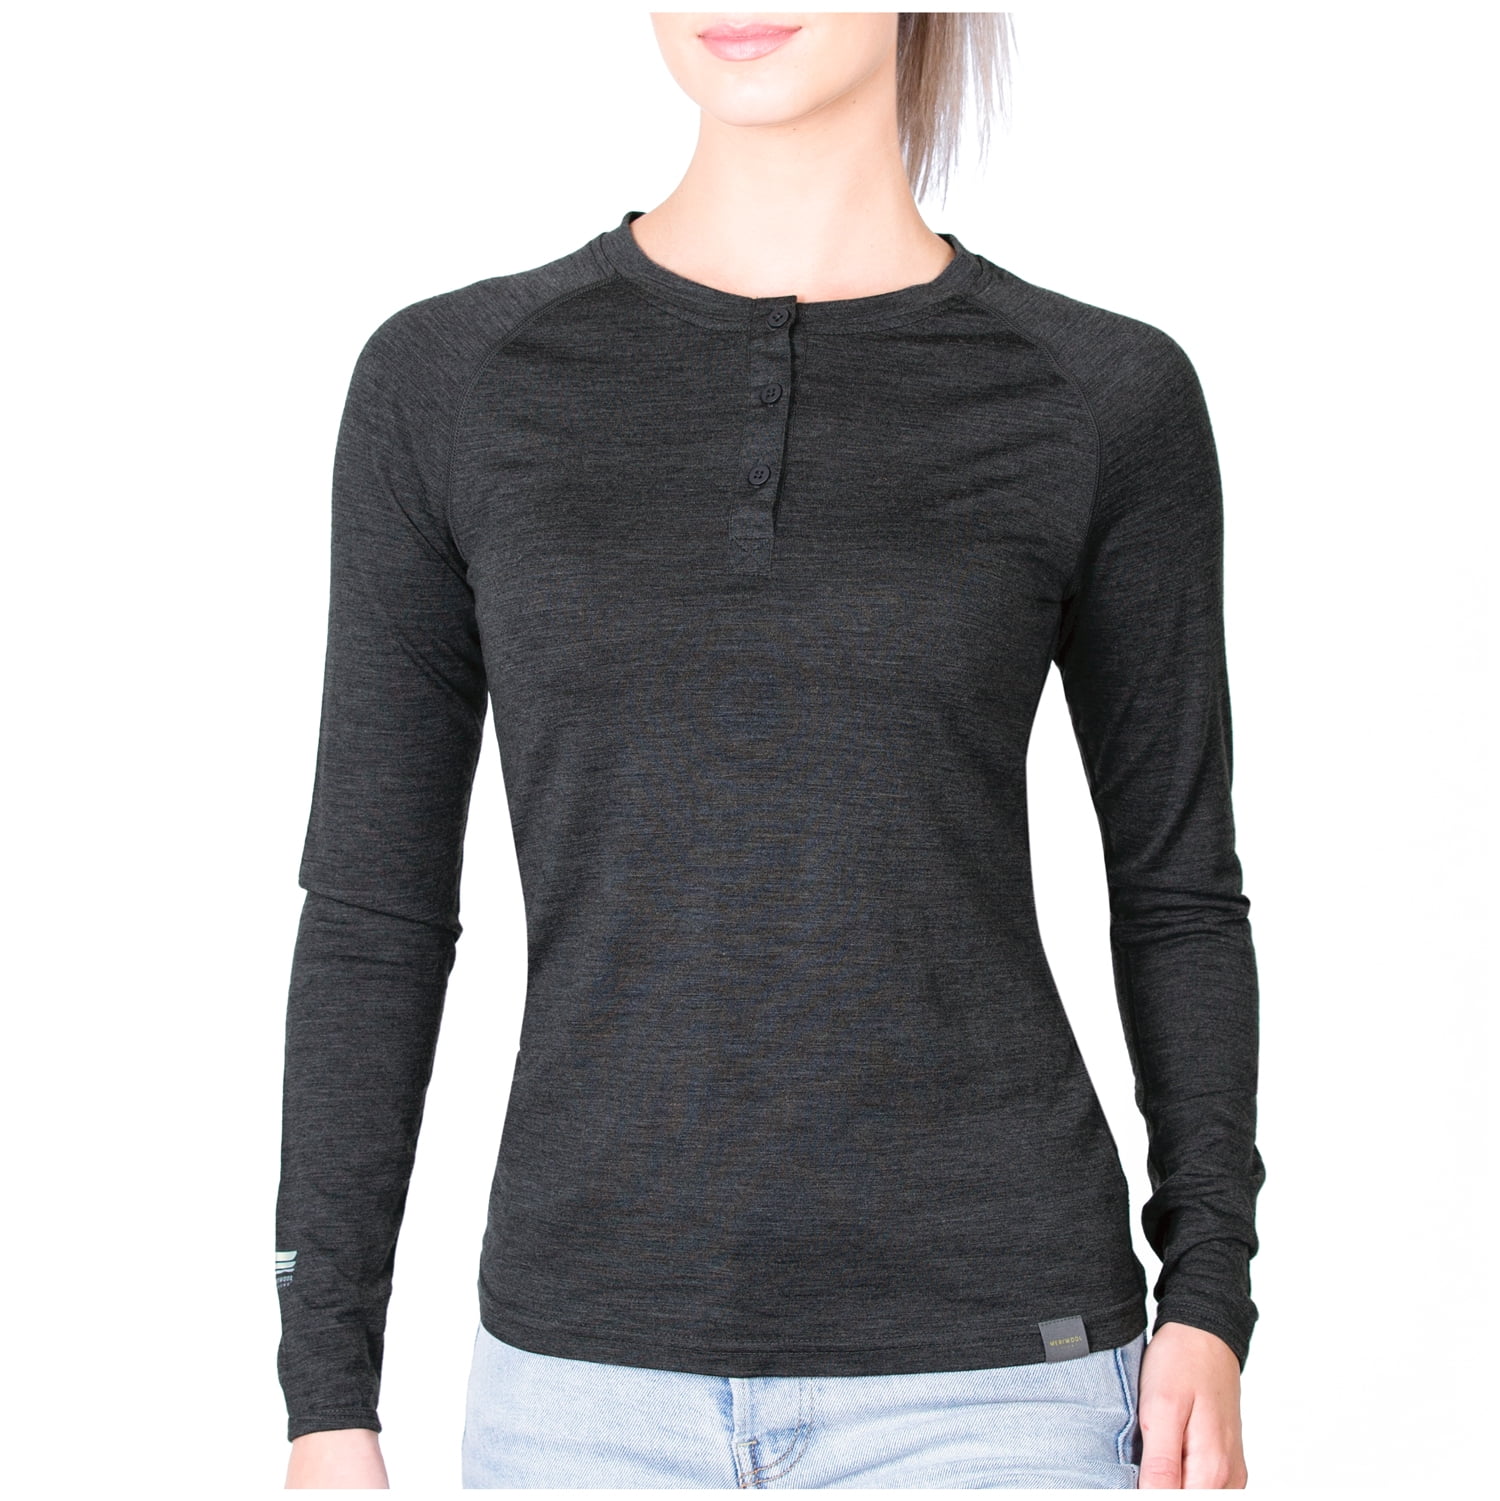 Details about   Womens Thermal Shirt Long Sleeve with Thumbhole Base Layers Softy Lightweight 